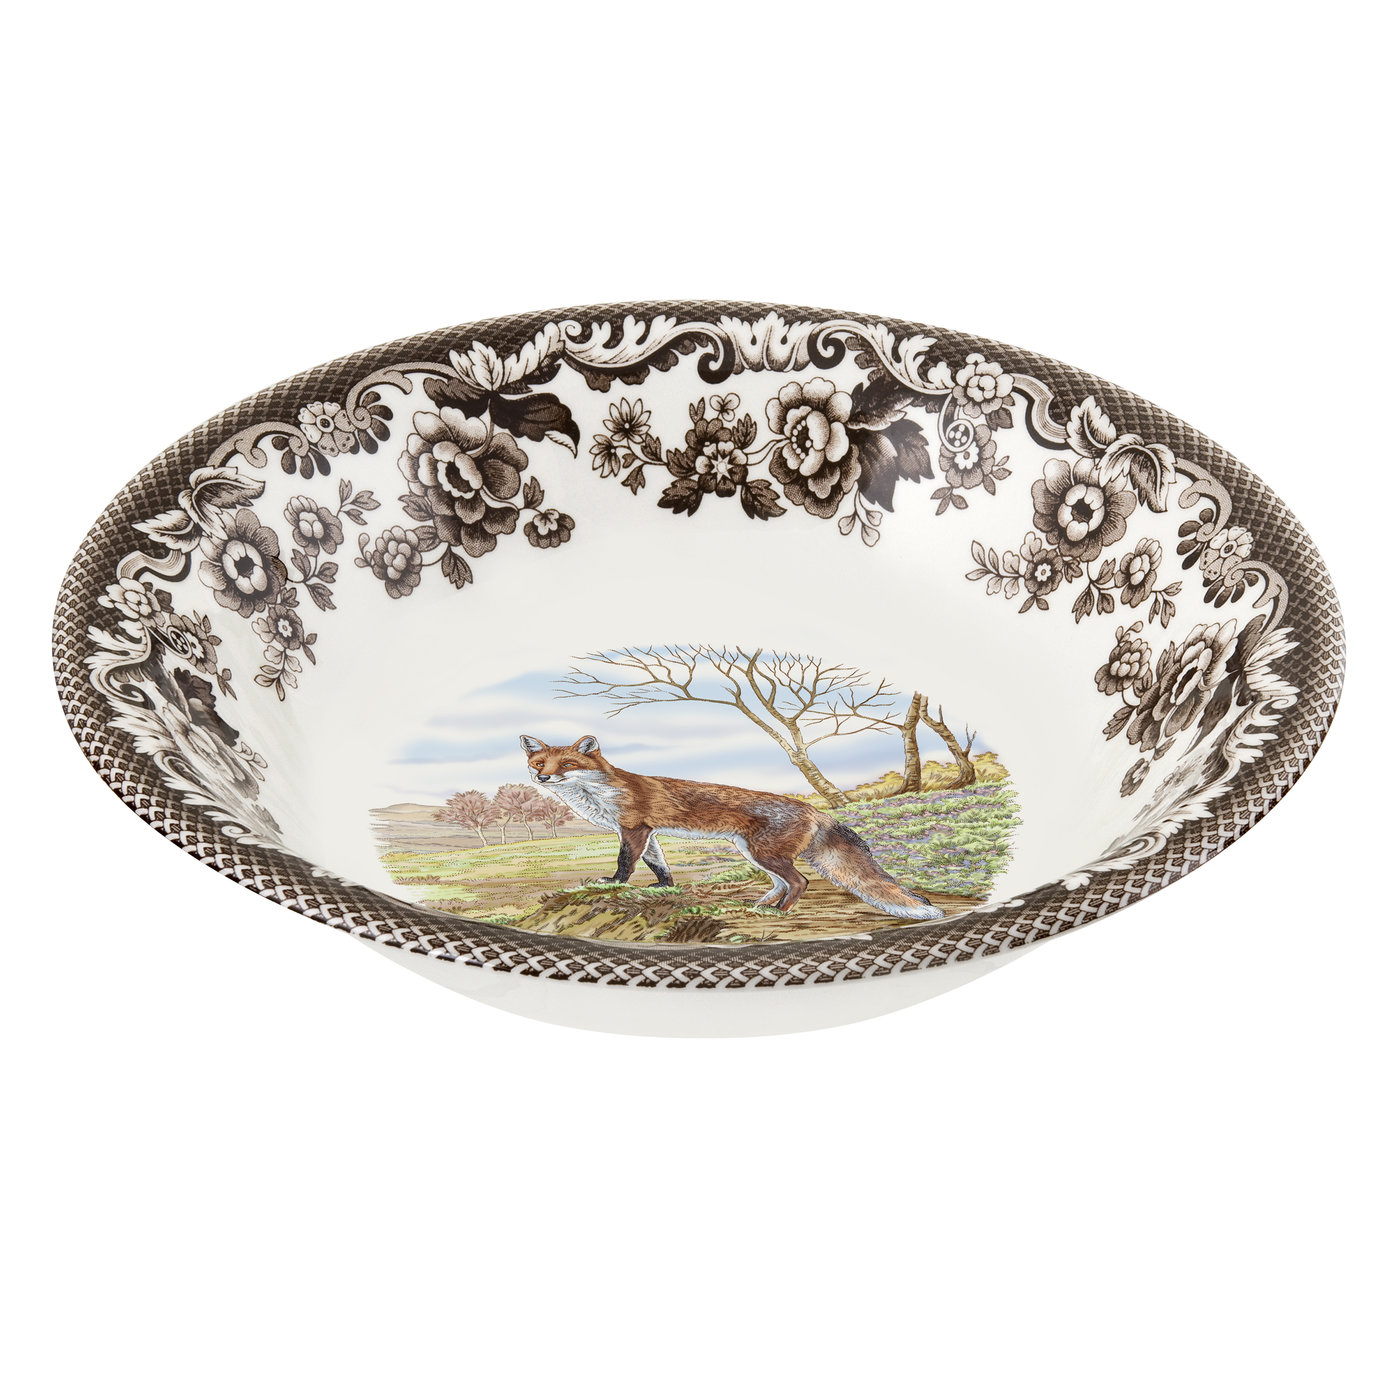 Woodland Ascot Cereal Bowl 8 Inch, Red Fox image number null